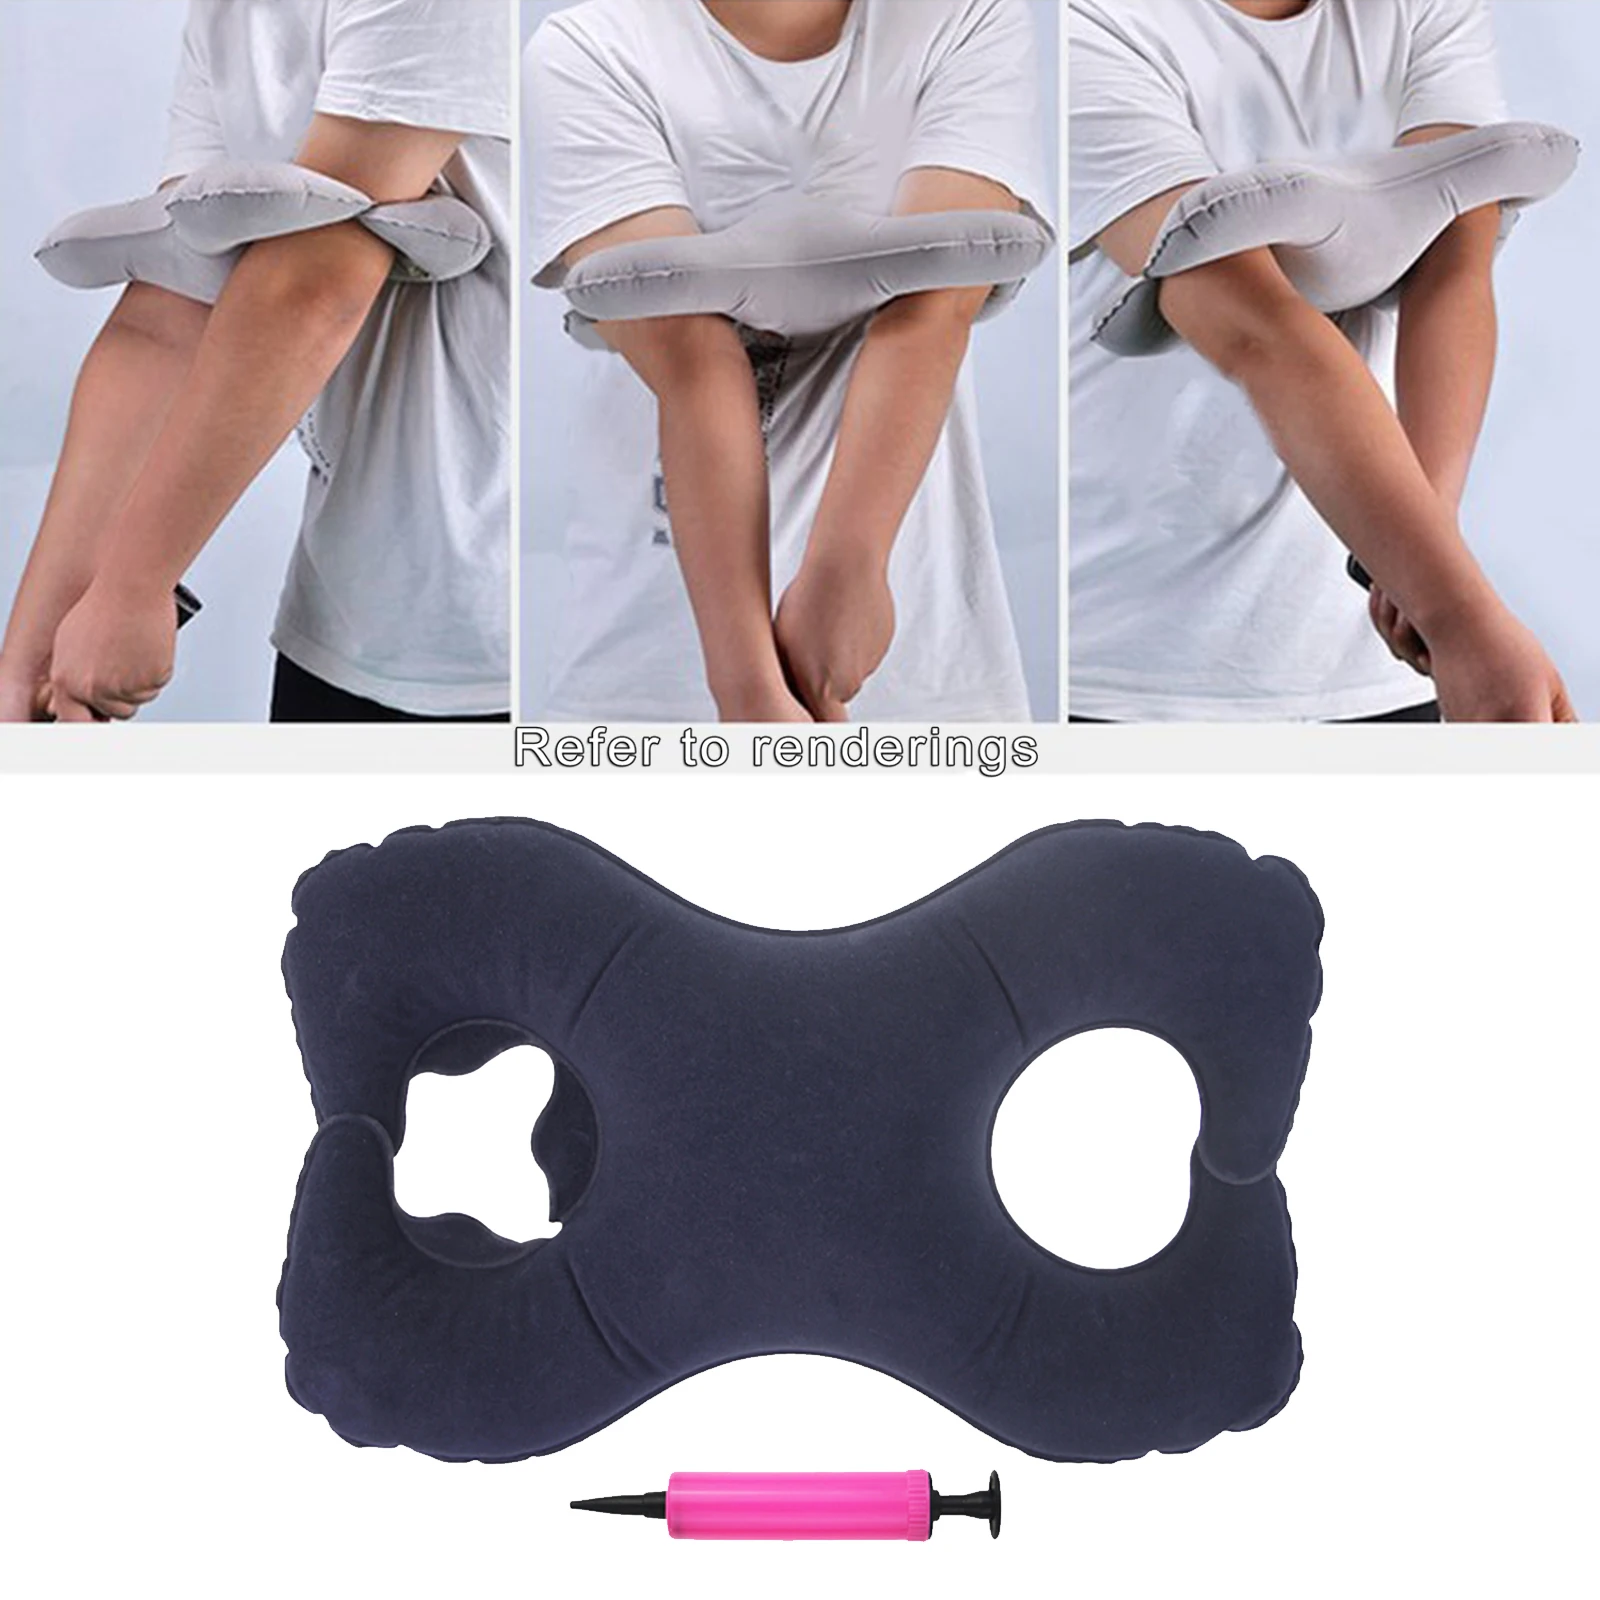 Golf Swing Training Aids Inflation Arm Band Practice for Kids Adults Golf